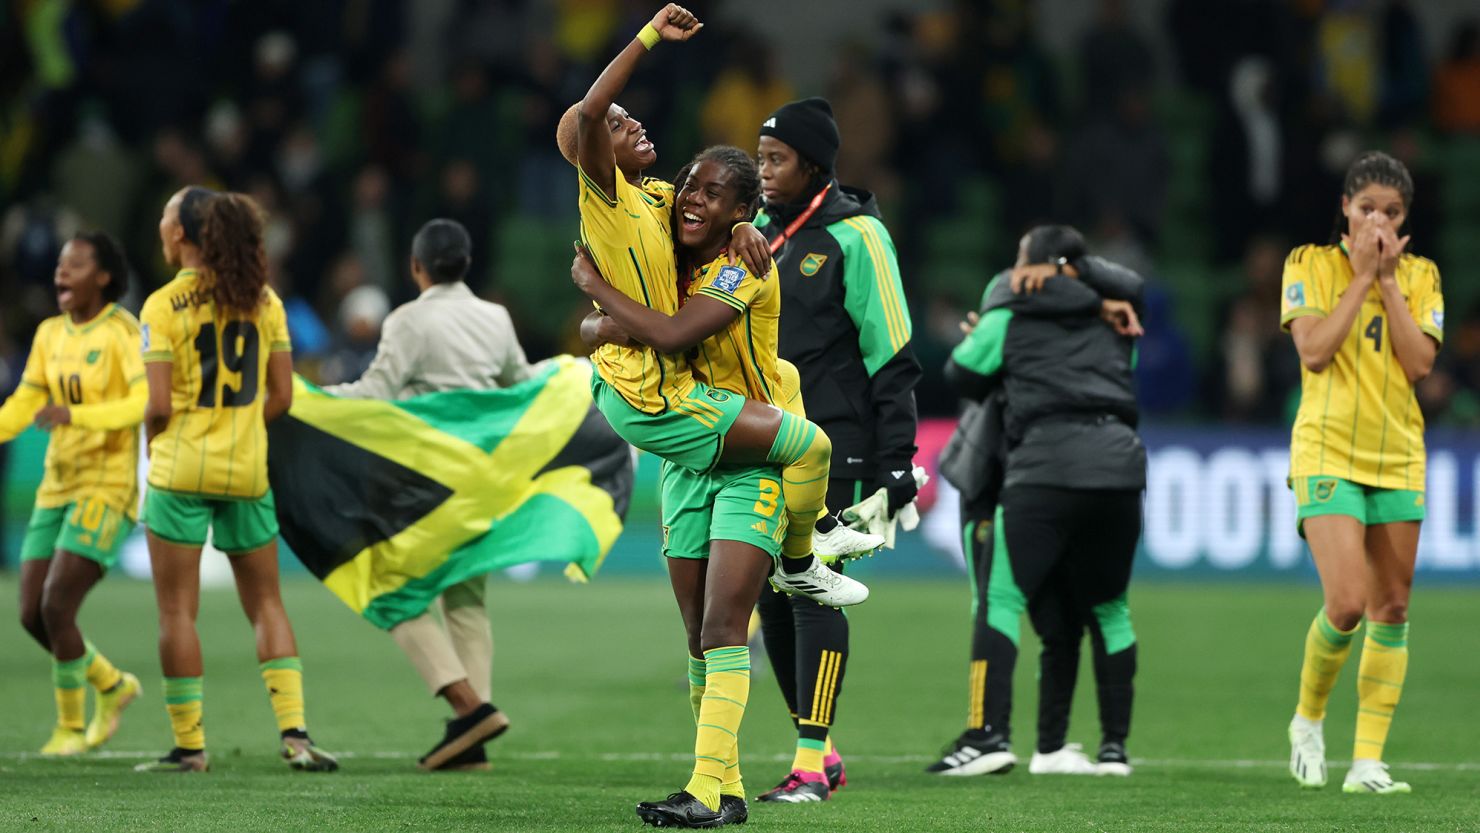 MELBOURNE, AUSTRALIA - AUGUST 02: Jamaica players celebrate advancing to the knockout stage after the scoreless draw in the FIFA Women's World Cup Australia & New Zealand 2023 Group F match between Jamaica and Brazil at Melbourne Rectangular Stadium on August 02, 2023 in Melbourne, Australia. (Photo by Robert Cianflone/Getty Images)